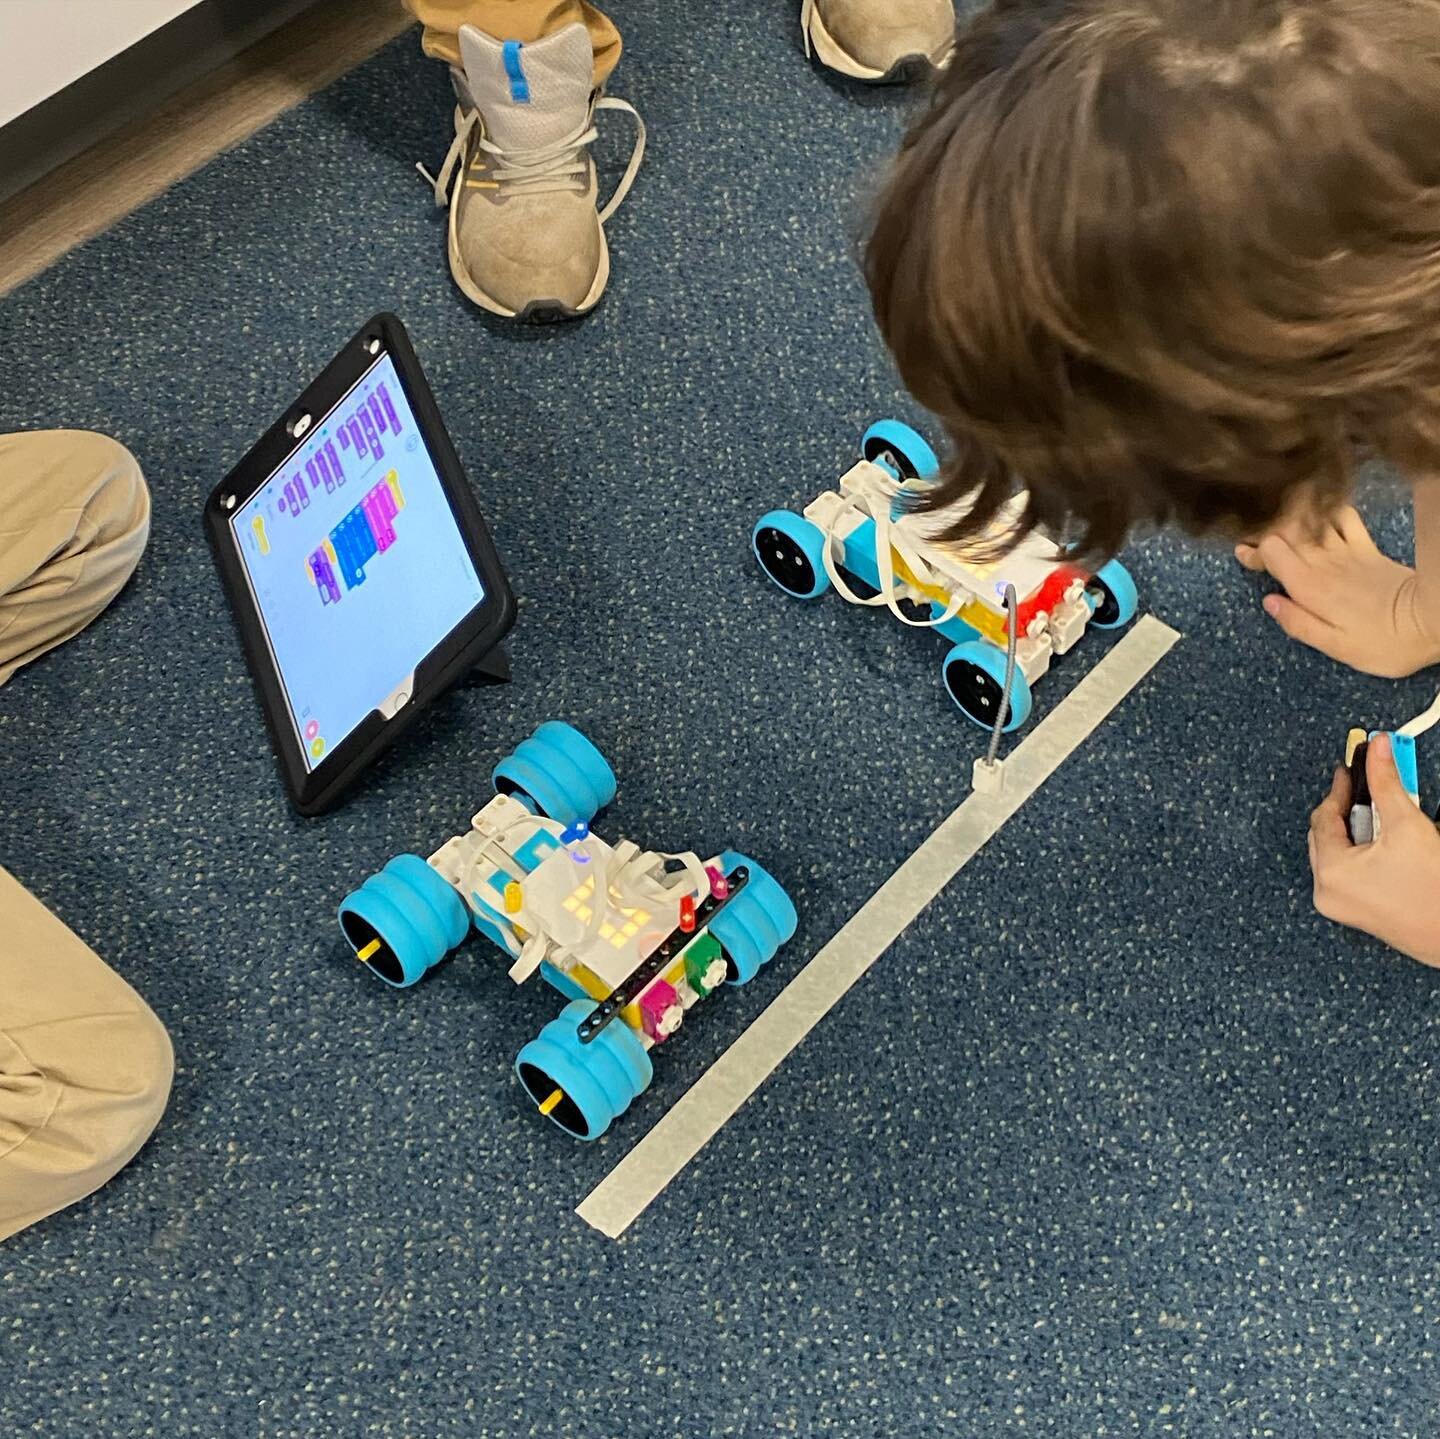 February recap of our Lego Robotics class: Monster truck races, meteorologists, wind indicators, breakdancers and hoppers. 🤖
P.S. It&rsquo;s cloudy in Barcelona